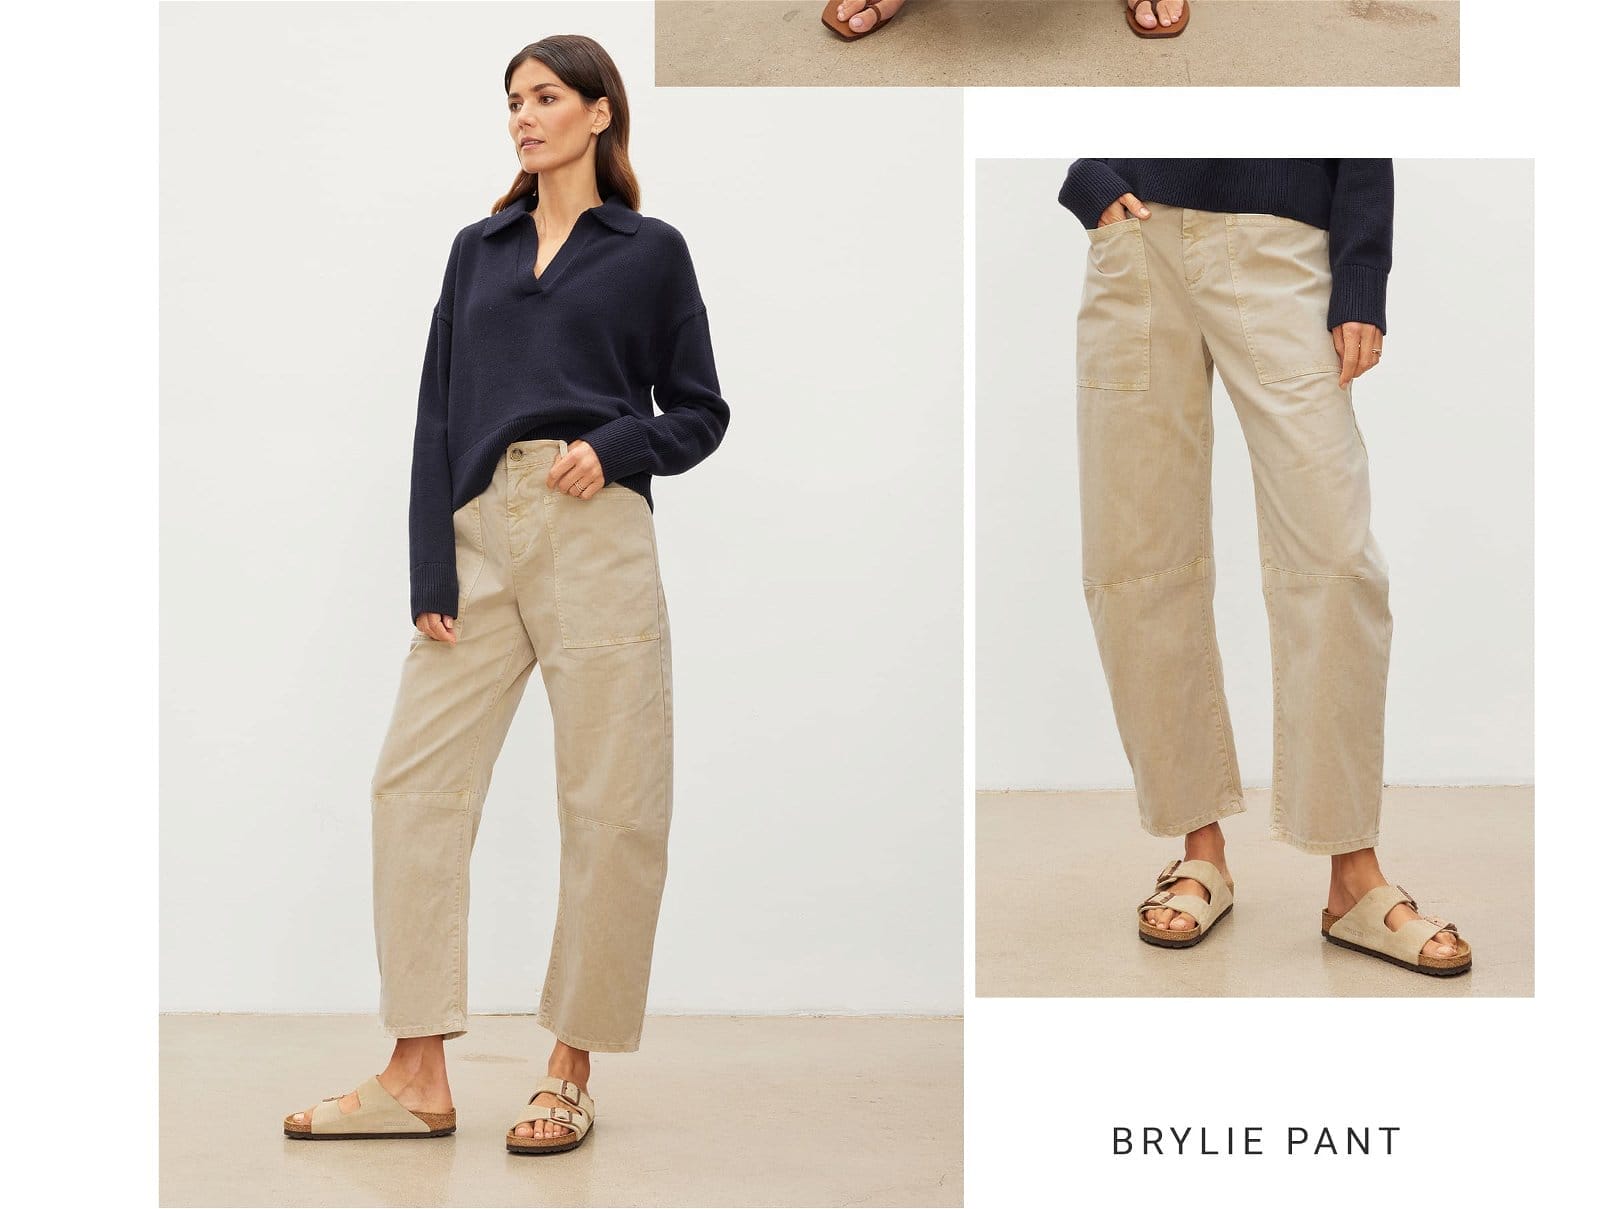 Model wearing the Brylie Pant